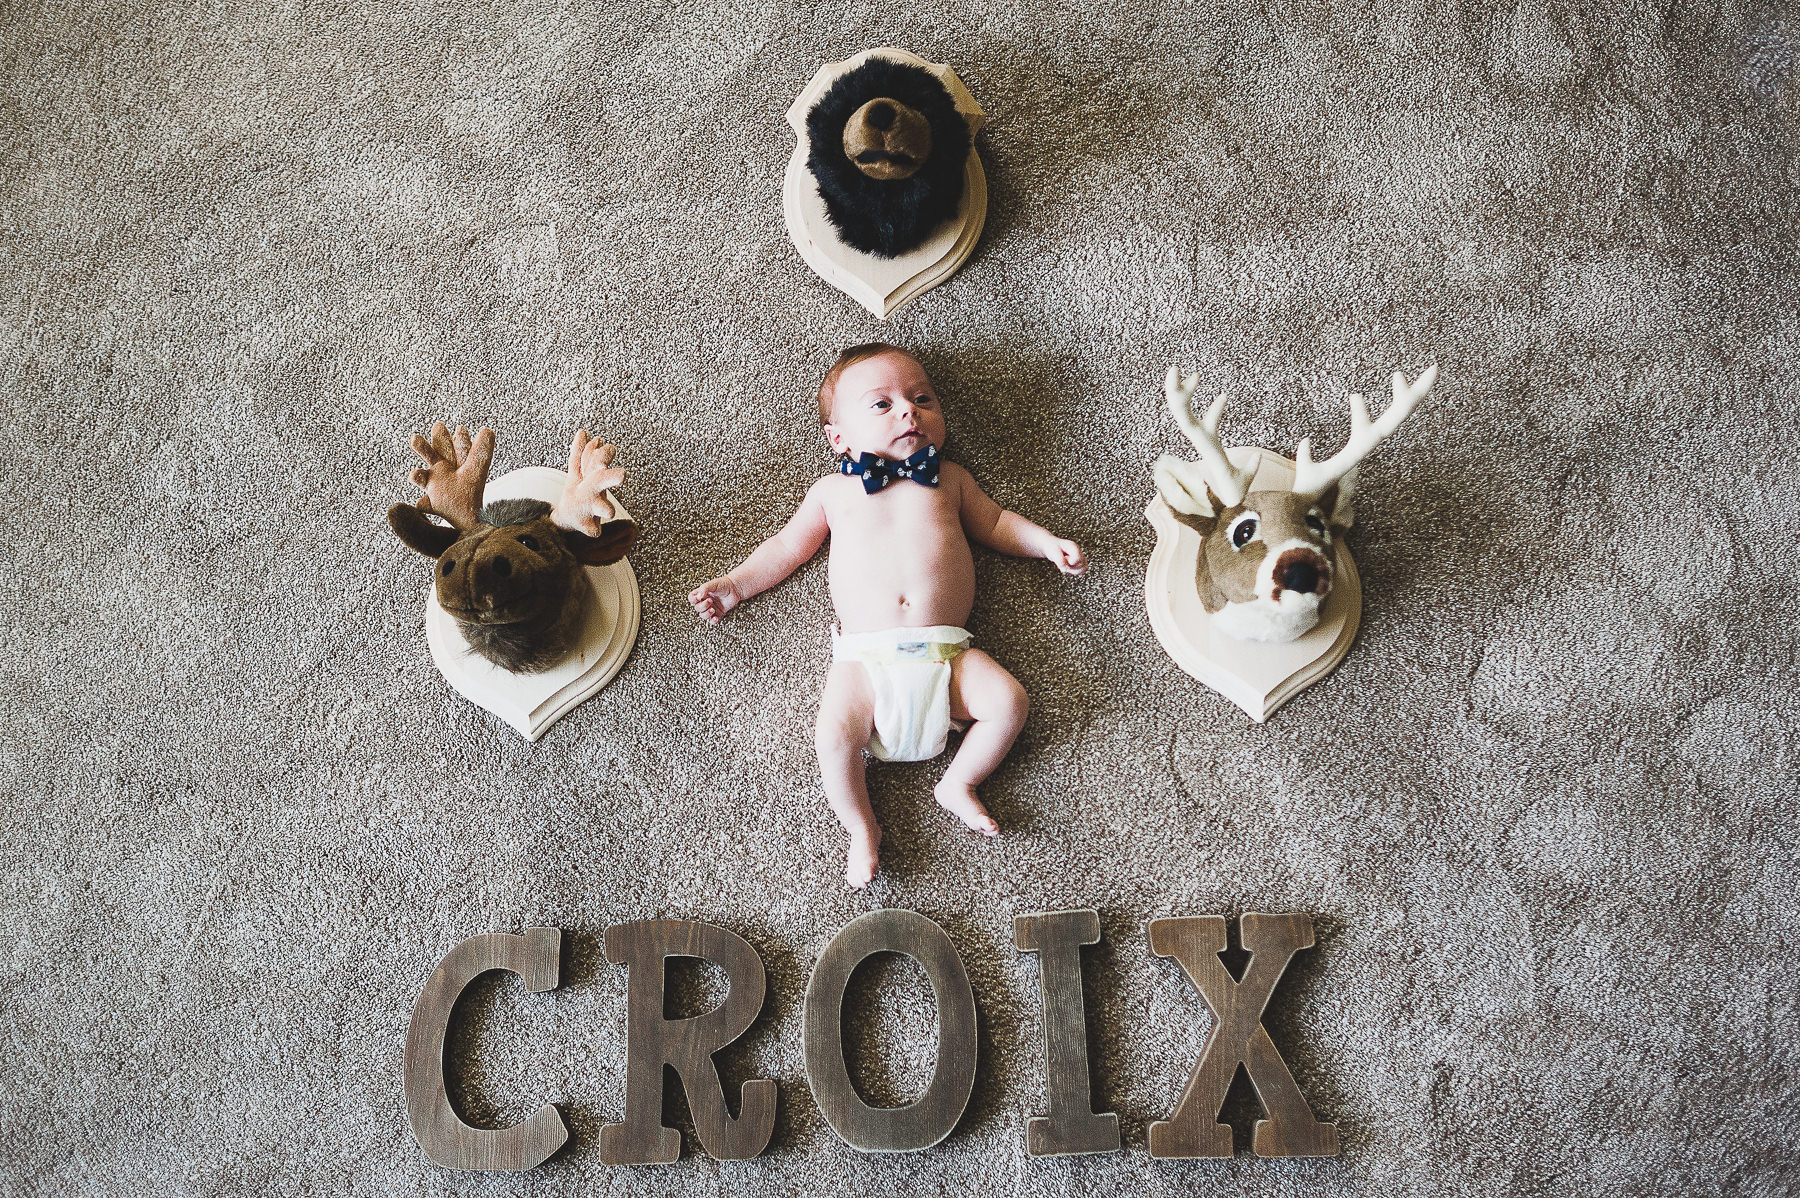 breighton-and-basette-photography-copyrighted-image-blog-croix-newborn-045.jpg